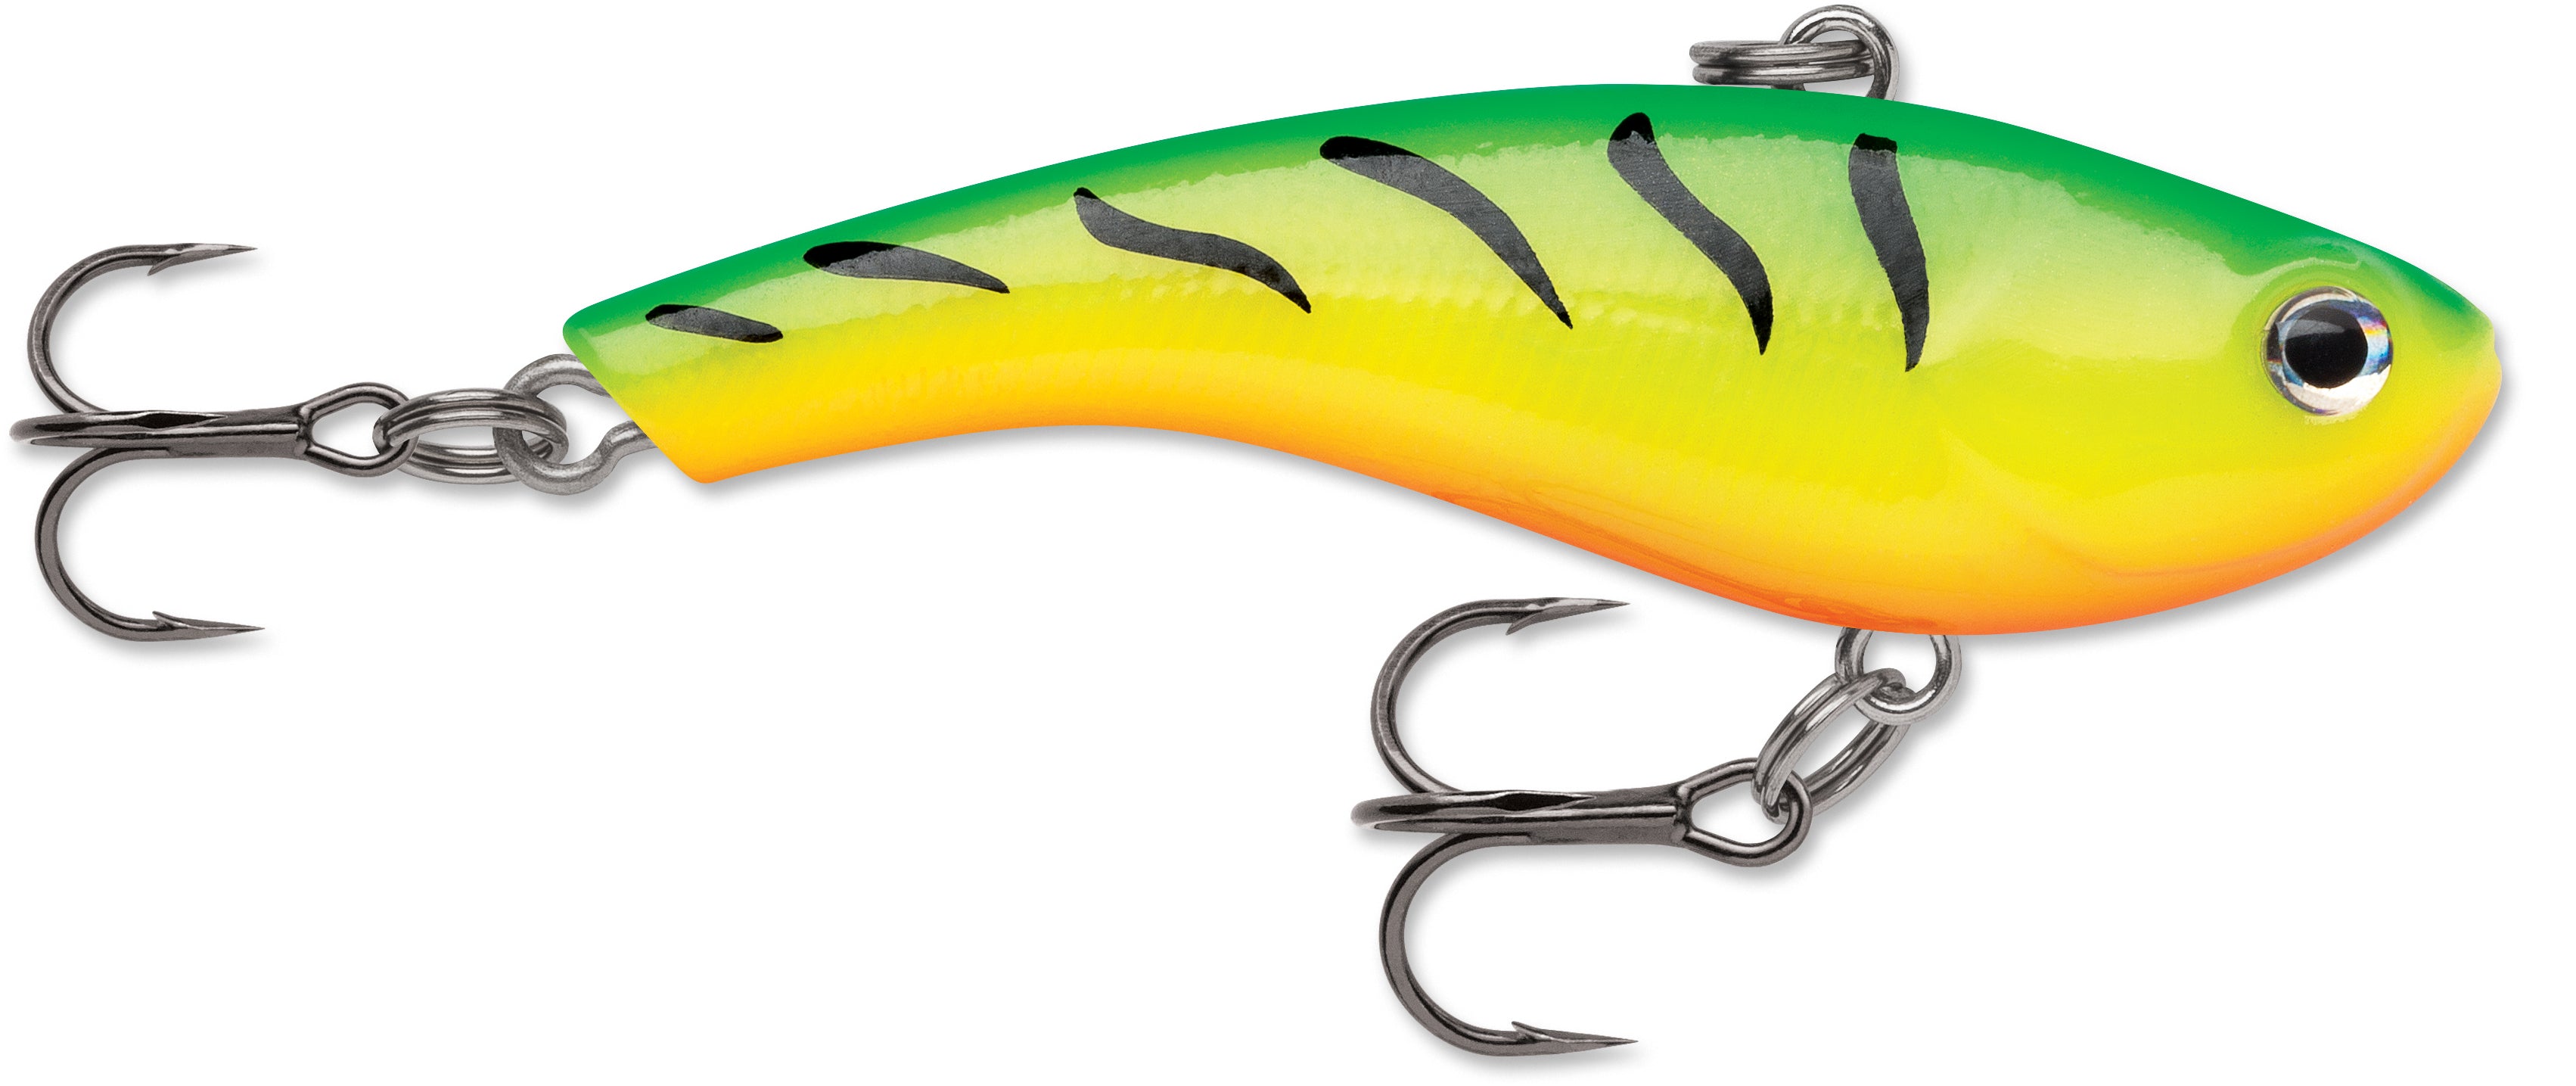 Slab Reap'r Spinnerbaits !, By SLAB HAPPY LURES